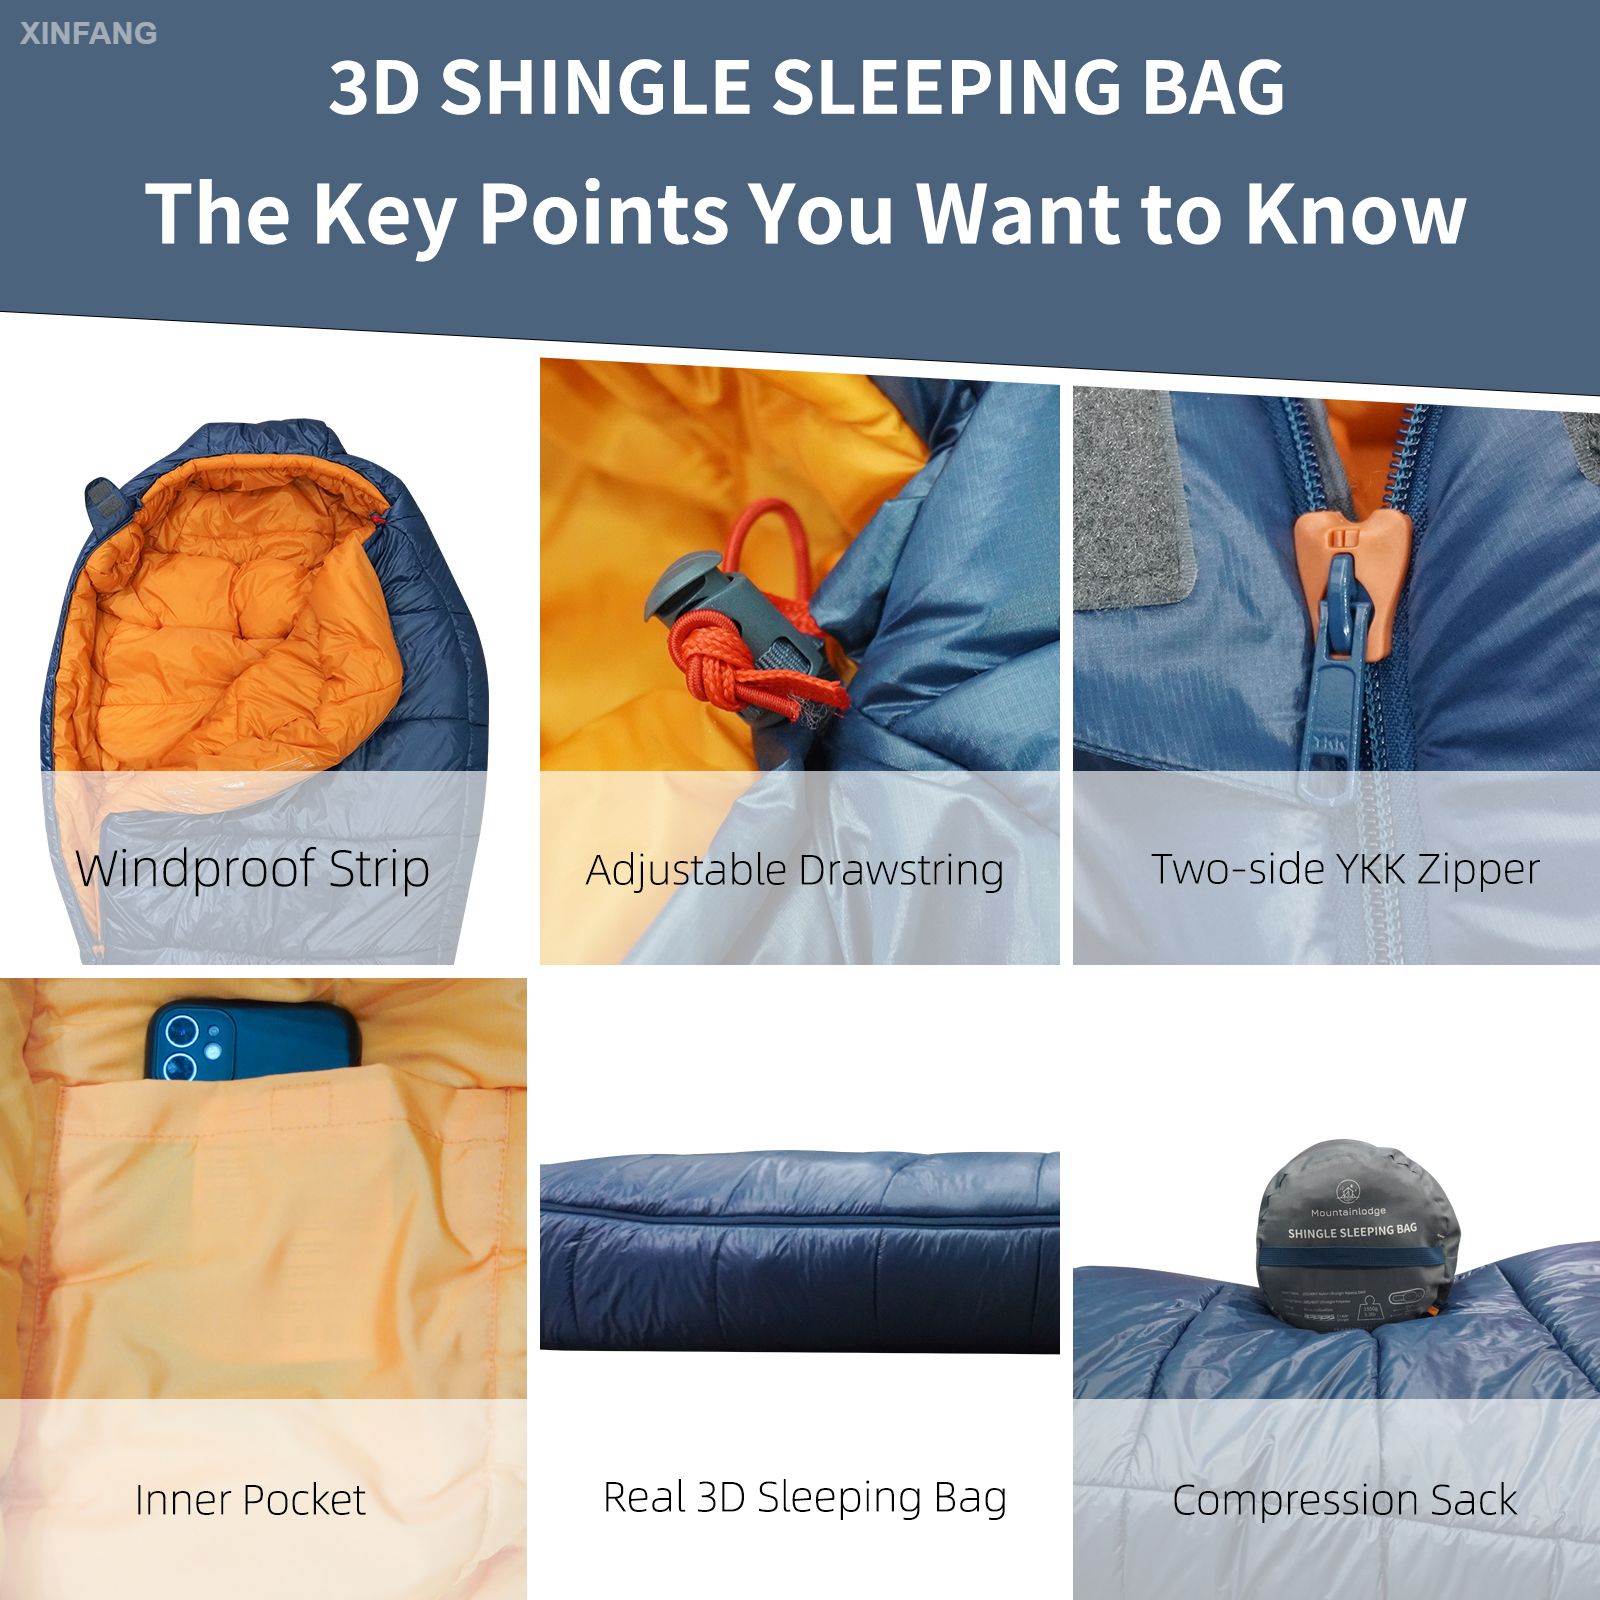 3-4 seasons Blue 3D Shingle Sleeping bag 15 Degree F with Inner Pocket for Adult,Perfect for Backpacking,Traveling and Hiking,including Free Stuff Sack(Right Hand)